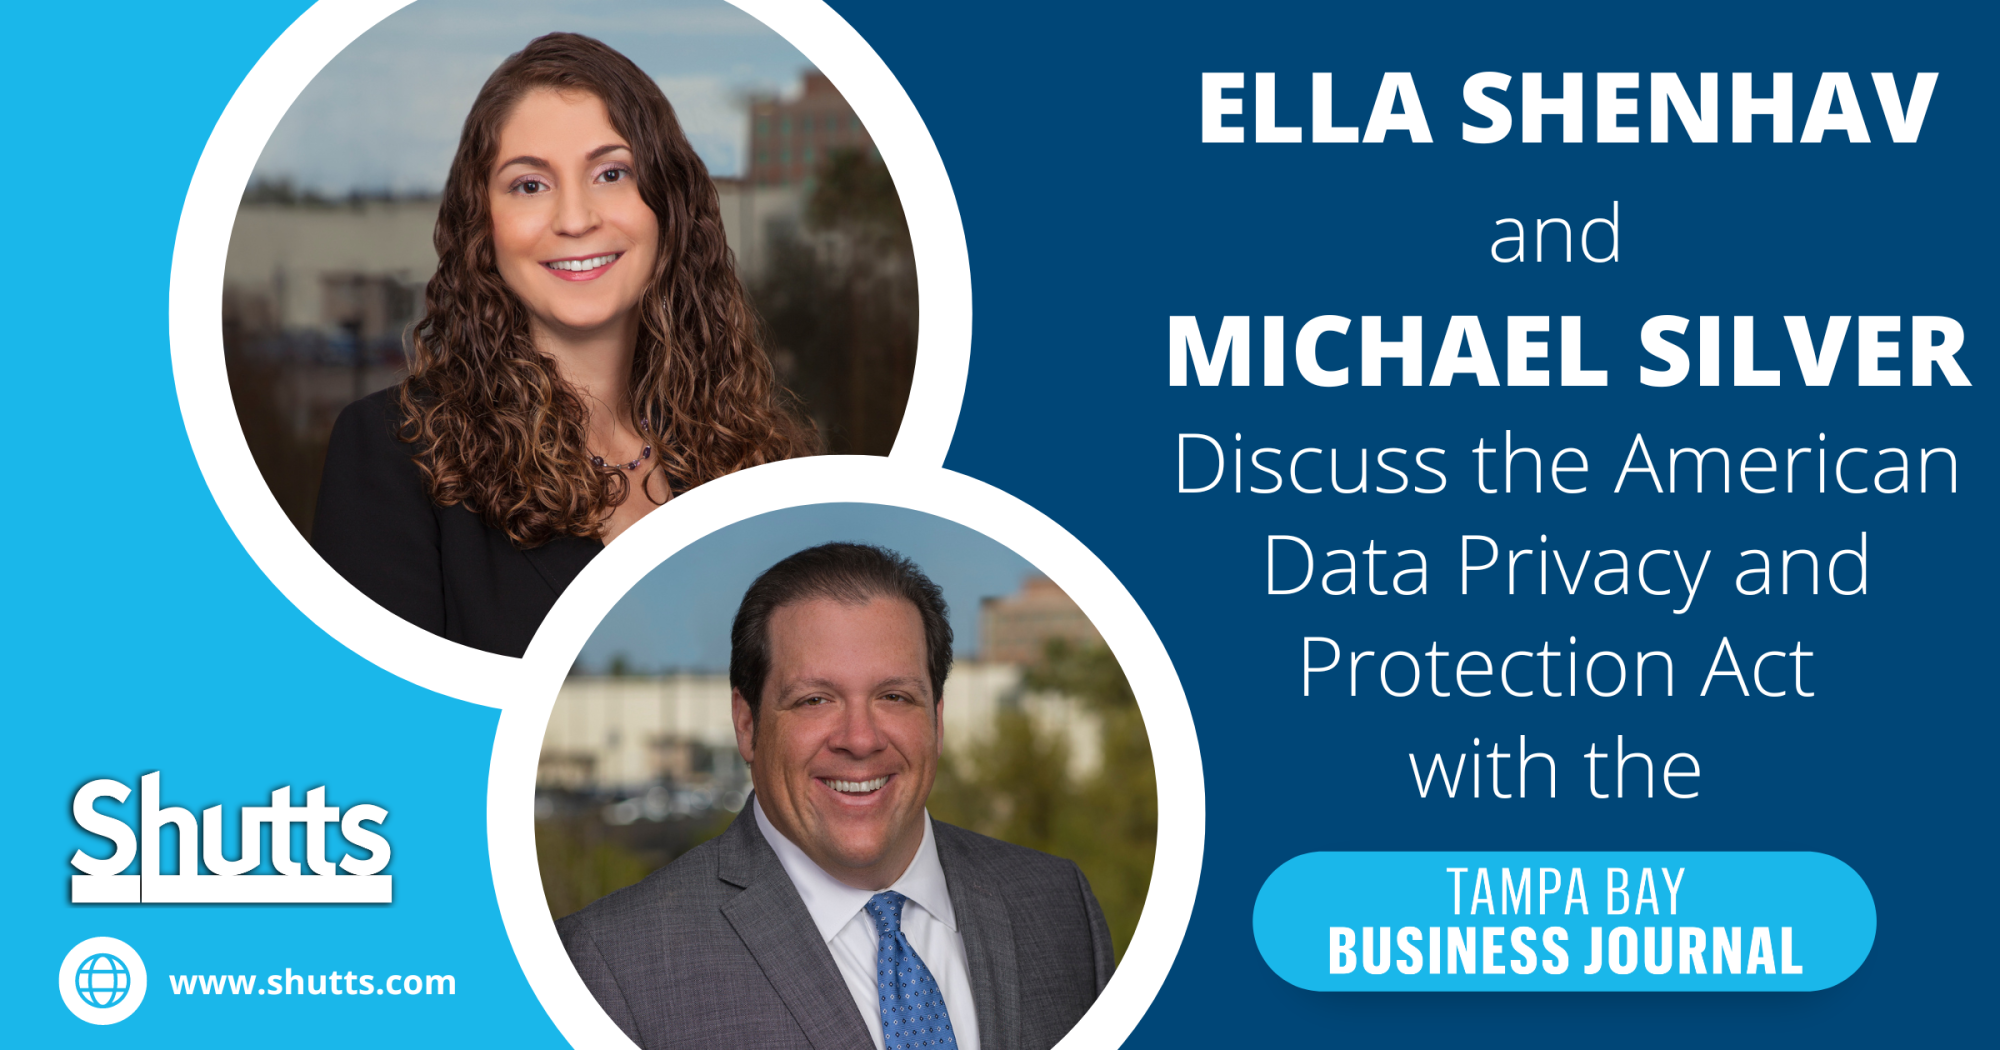 Ella Shenhav and Michael Silver Discuss the American Data Privacy and Protection Act with the TBBJ